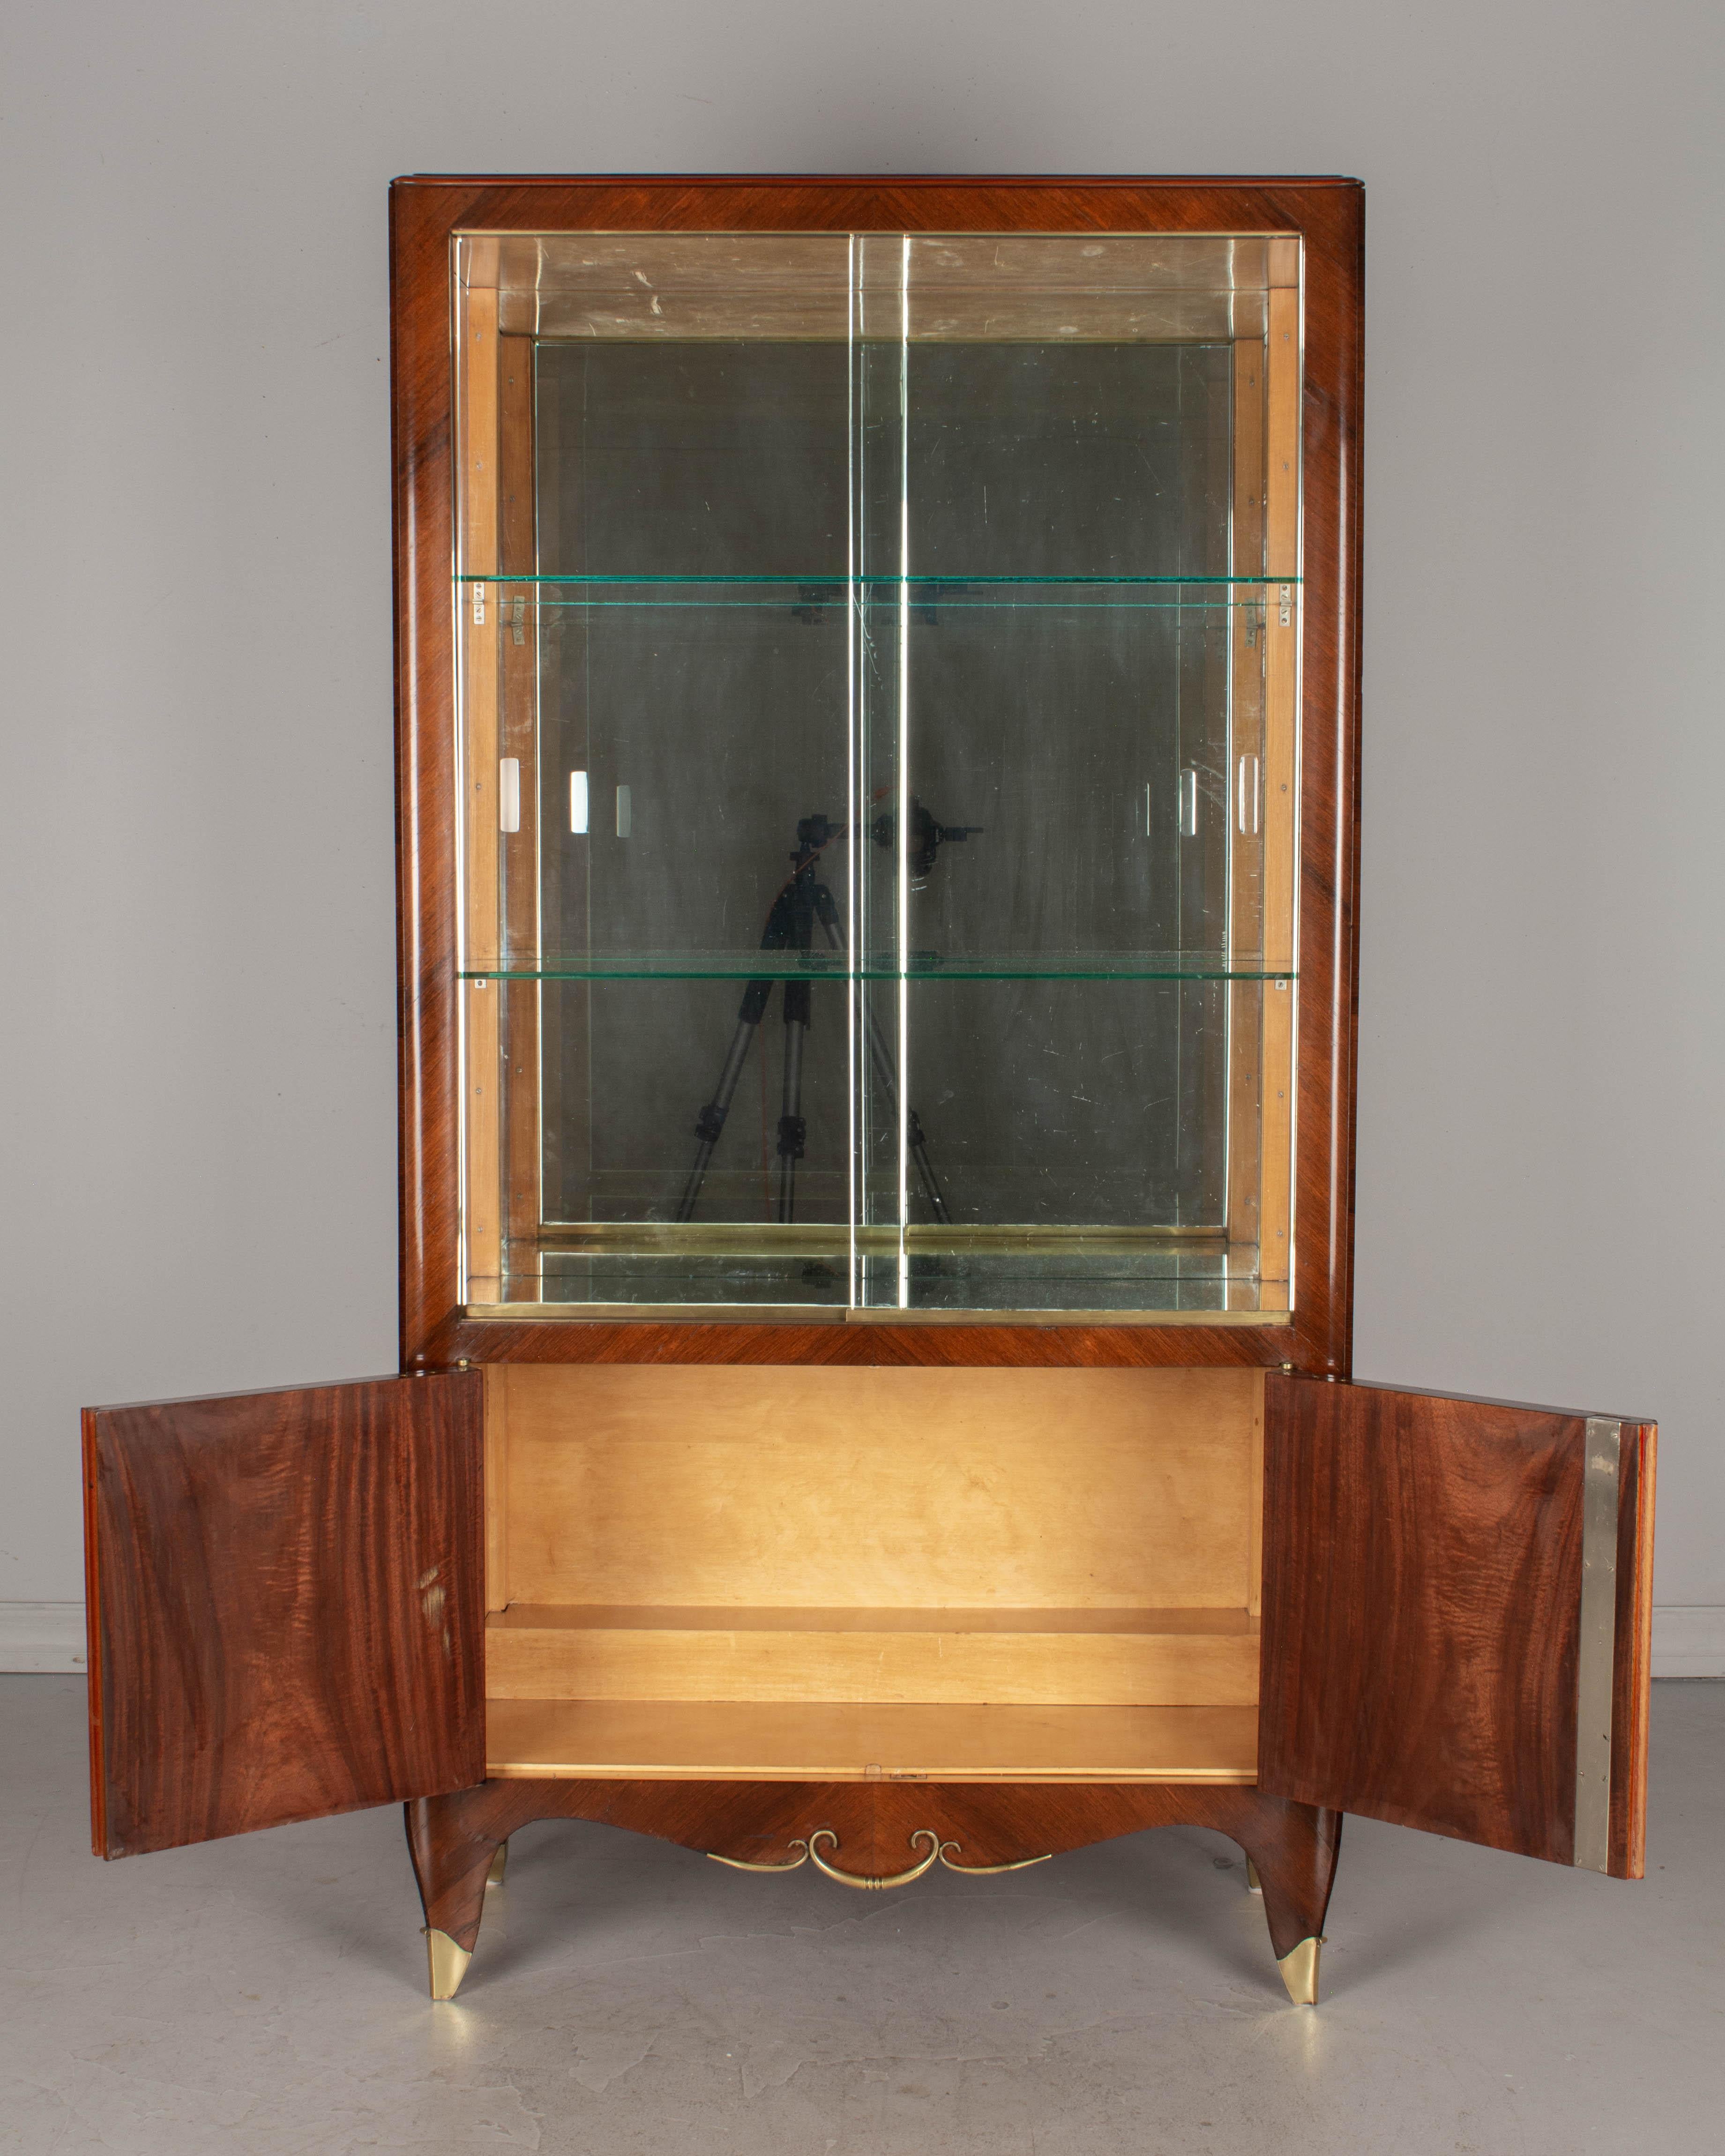 20th Century French Art Deco Mahogany Marquetry Display Cabinet